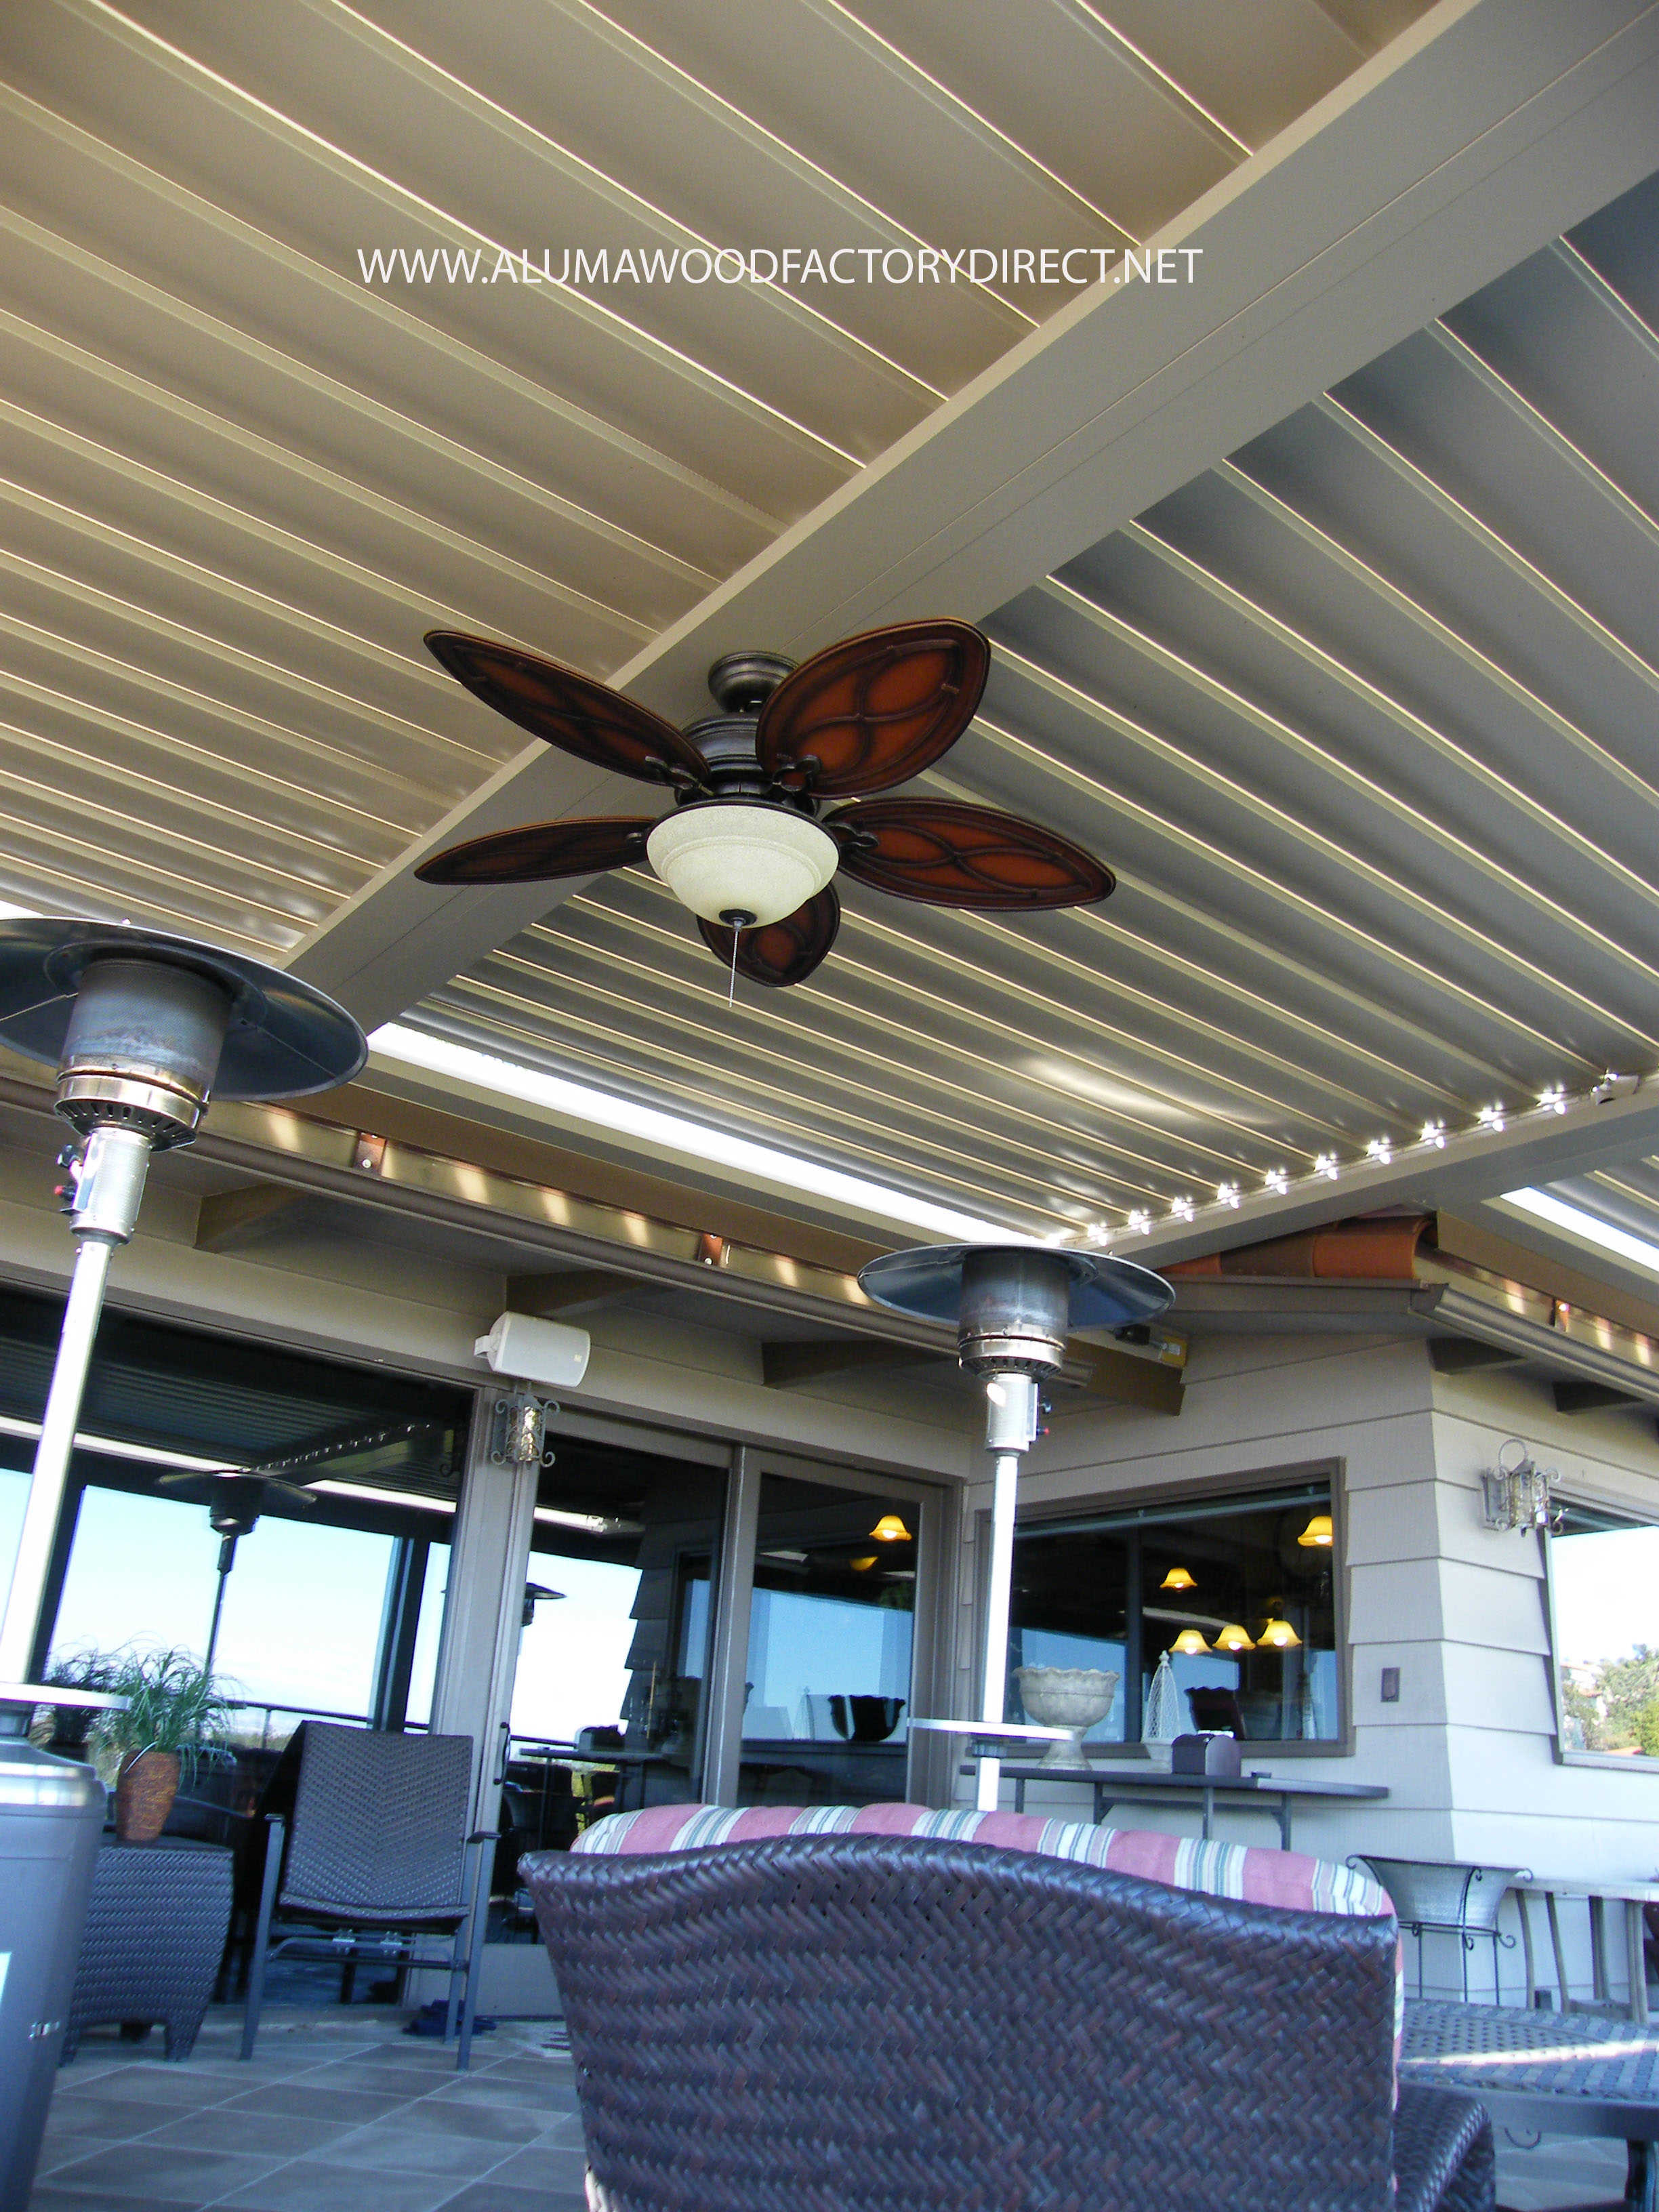 Patio Louvered roof- Equinox louvered roof system ...